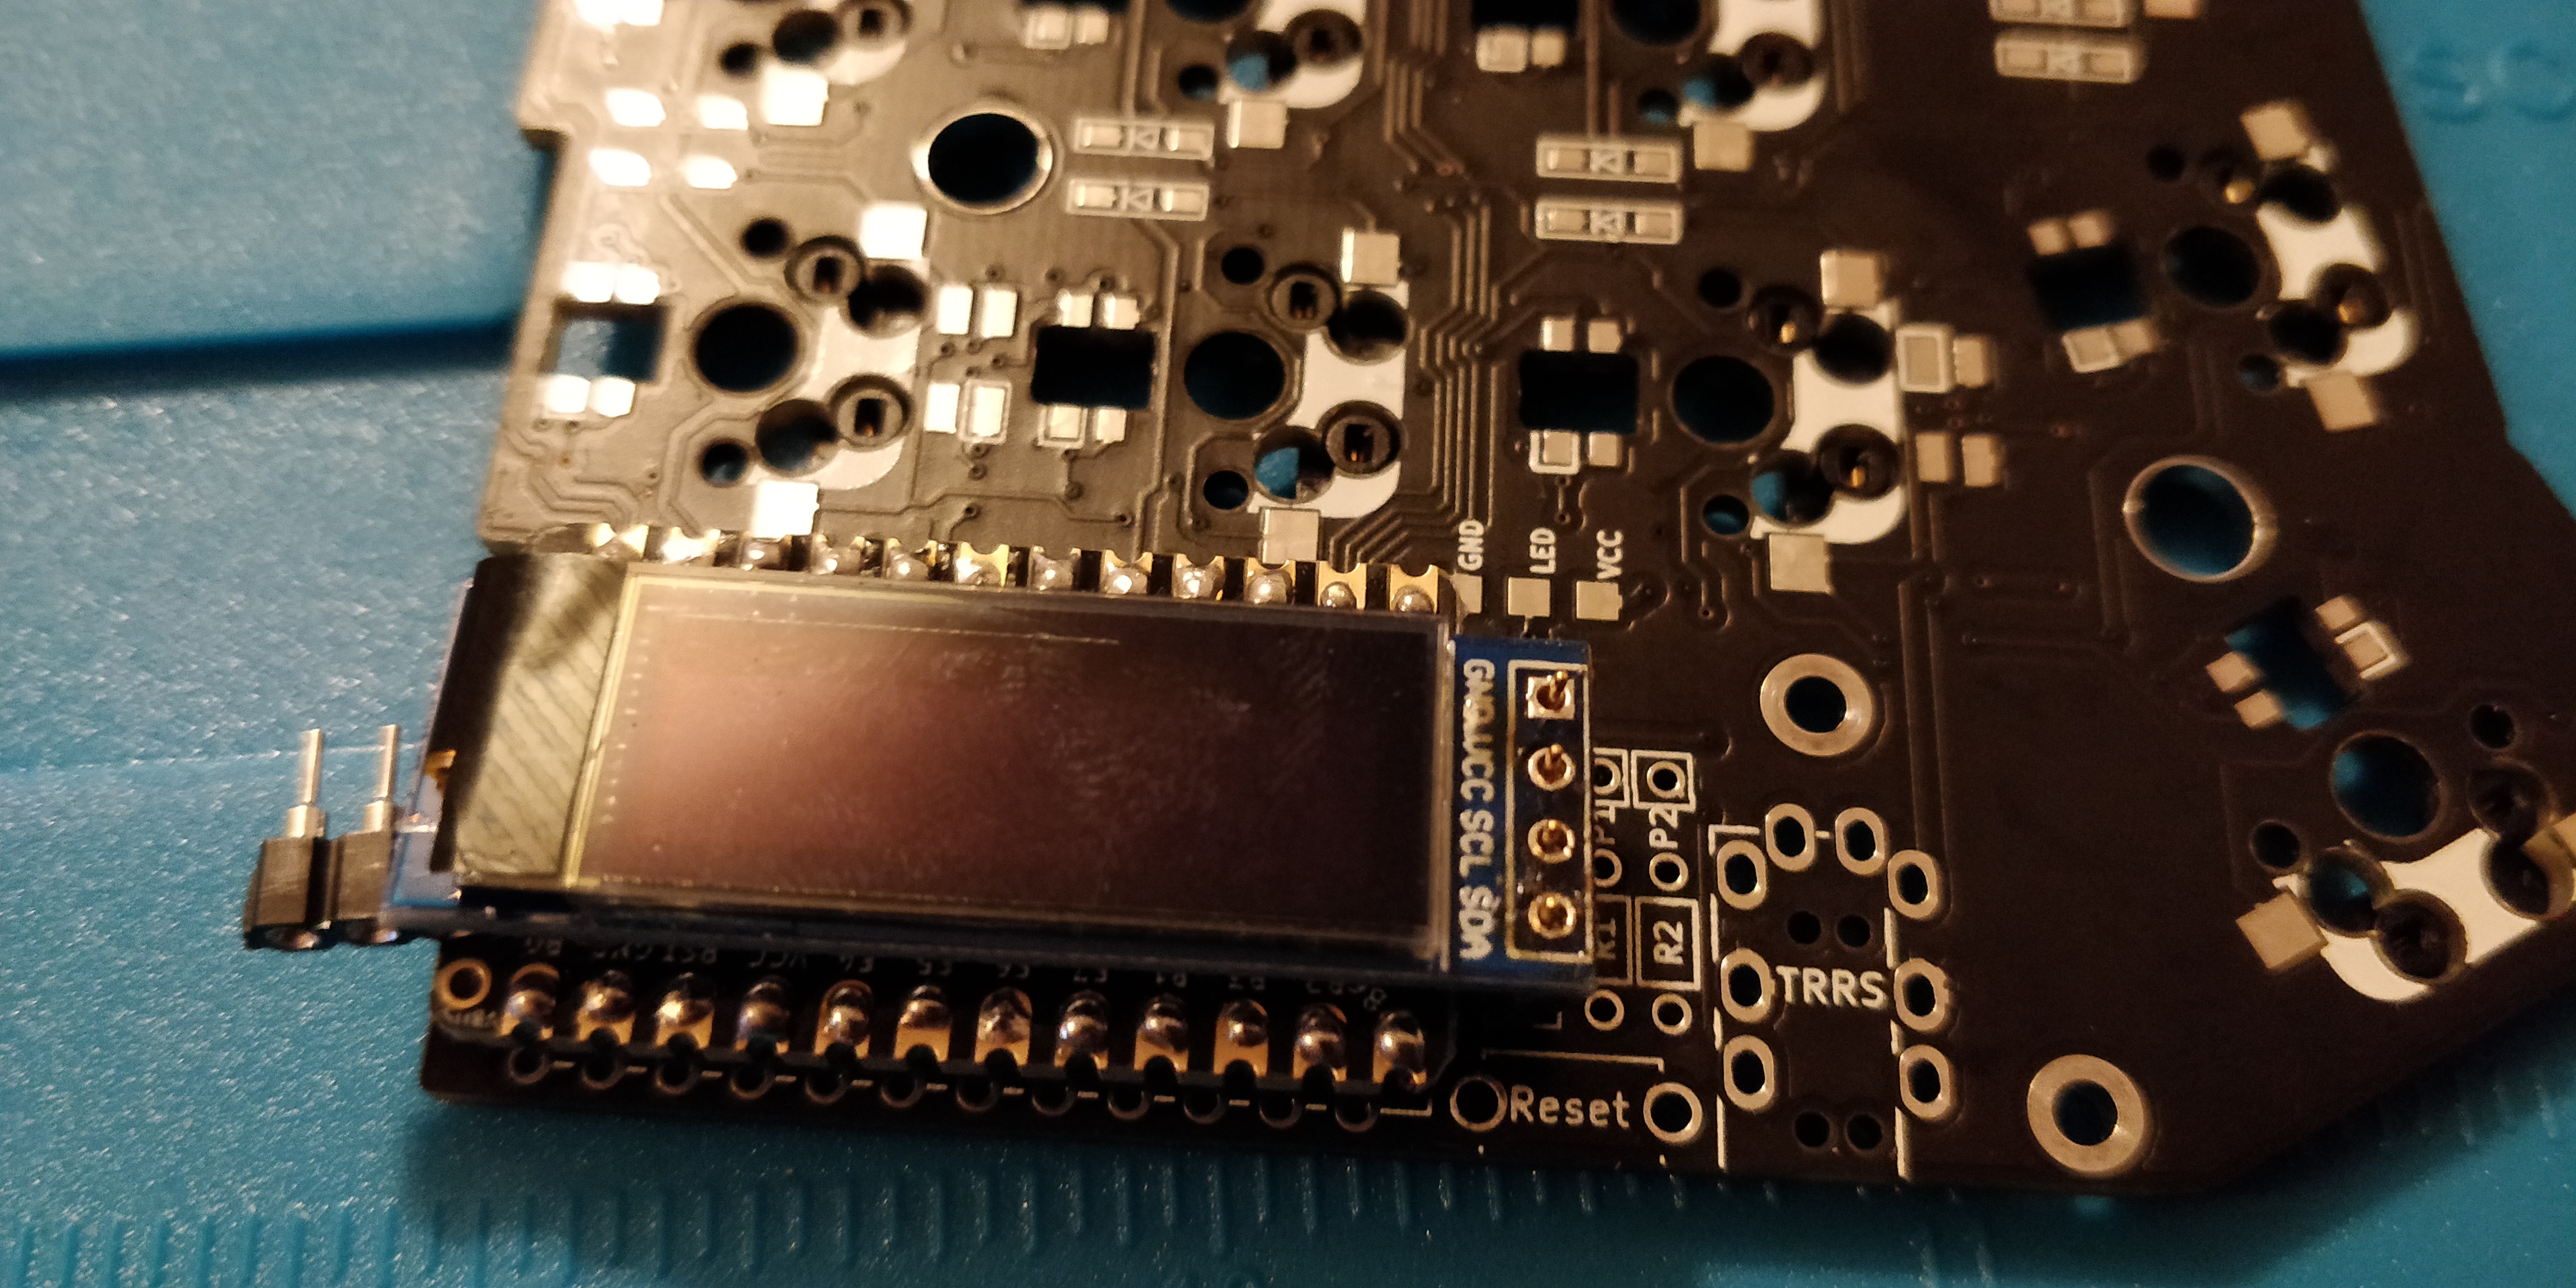 step 17 - corne crkbd - temporarily create a space divider to solder the OLED screen in place